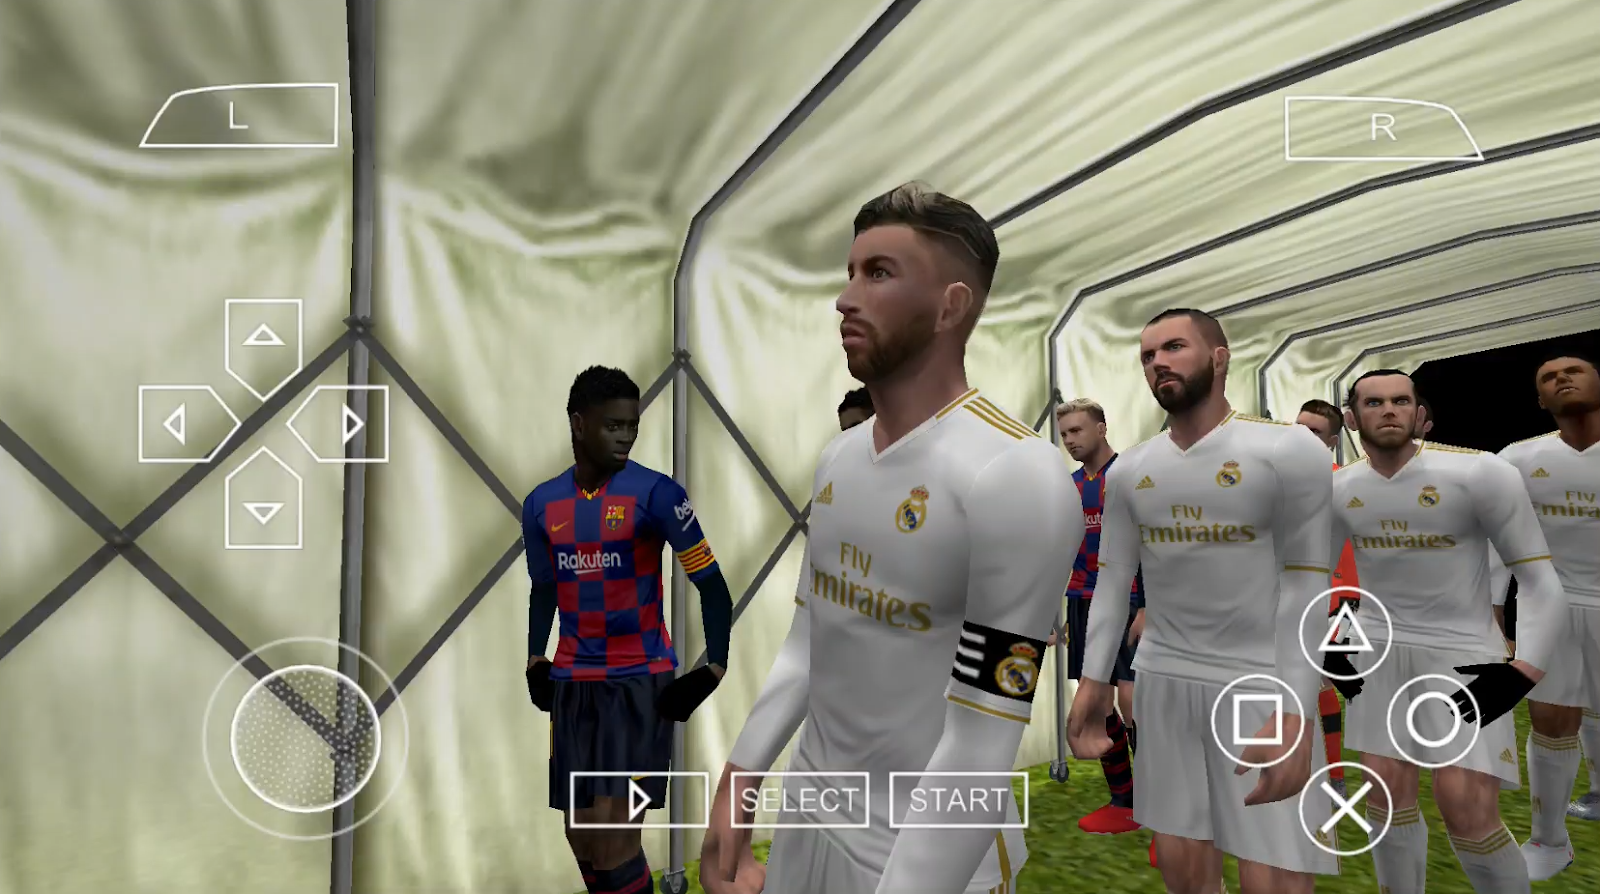 PES 2020 PPSSPP Camera PS4 Android Offline 600MB Best Graphics New Kits 2020 & Transfers Update